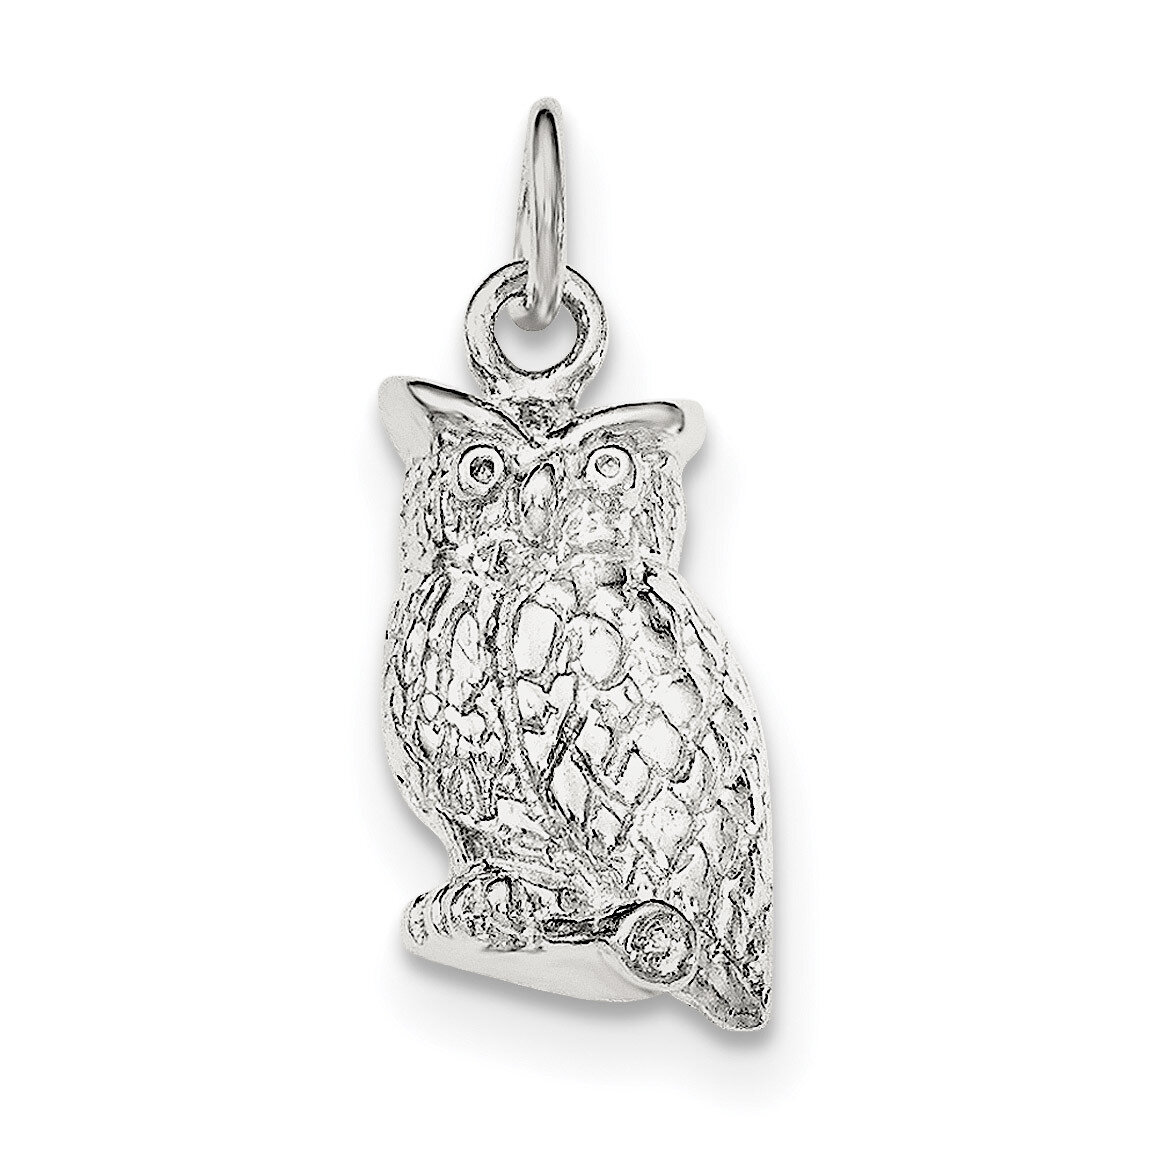 Textured Perched Owl Pendant Sterling Silver Polished QC8937